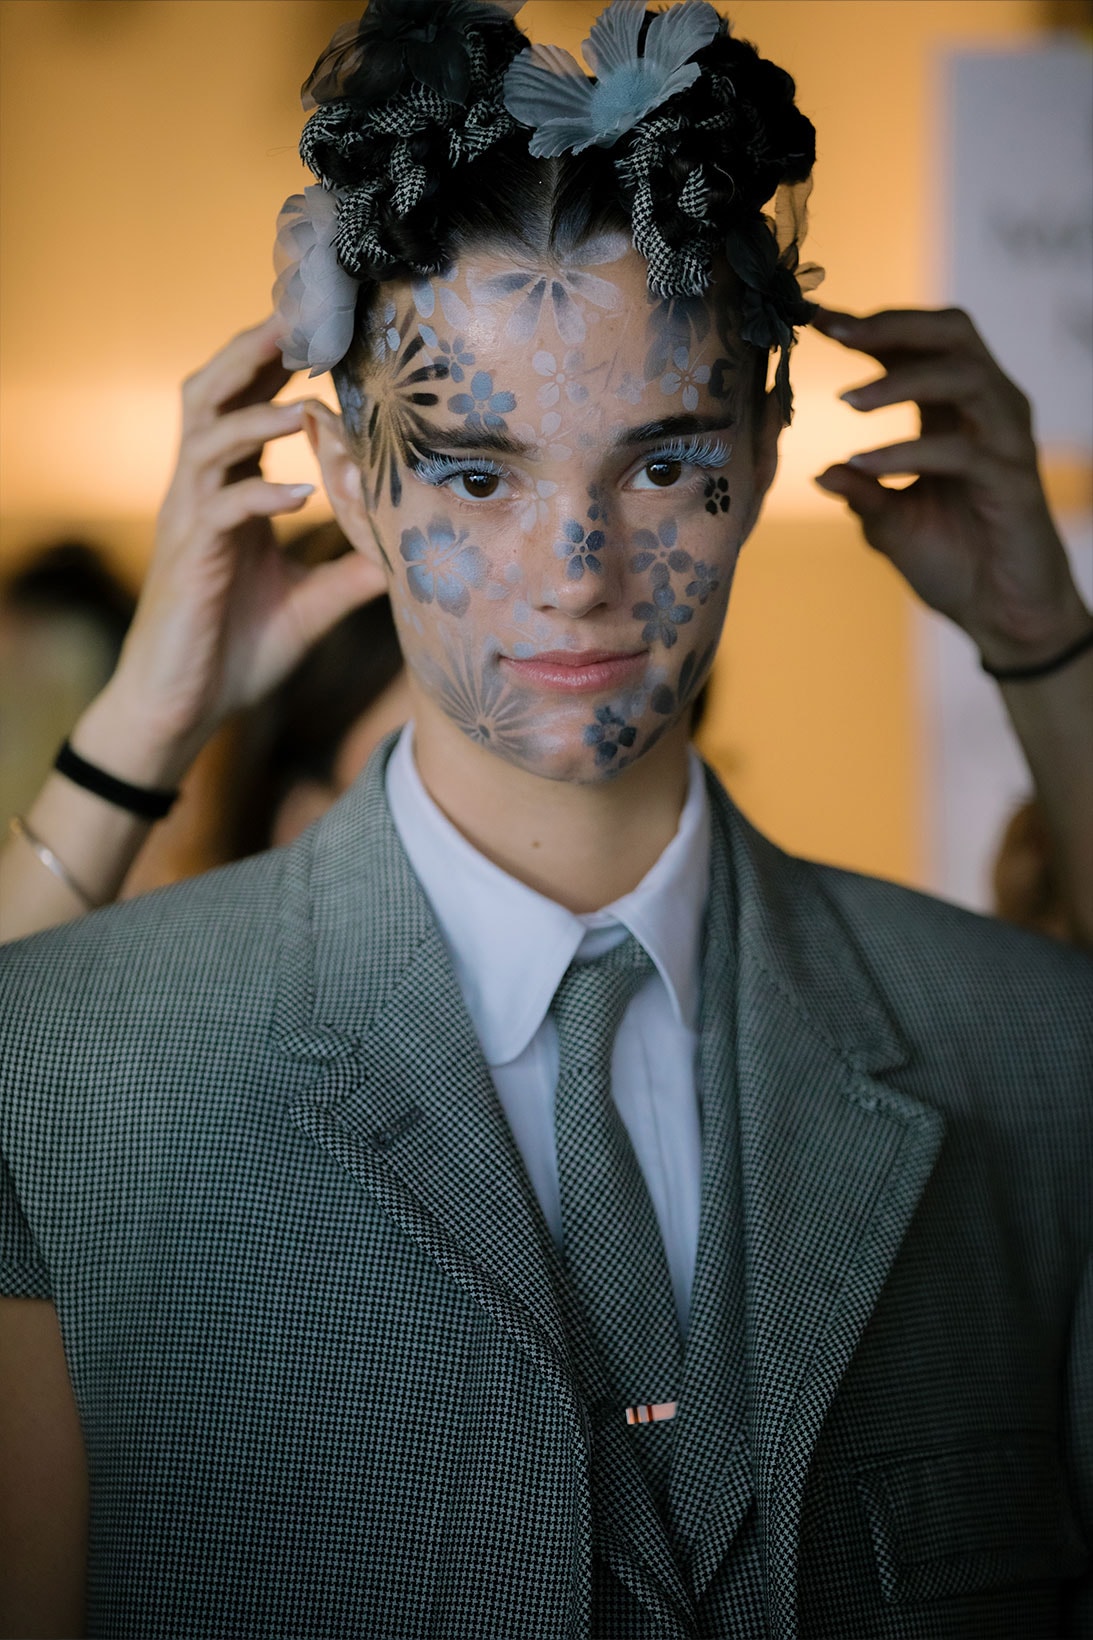 Thom Browne NYFW Spring/Summer 2022 SS22 Backstage Hair Tie Suit Jacket